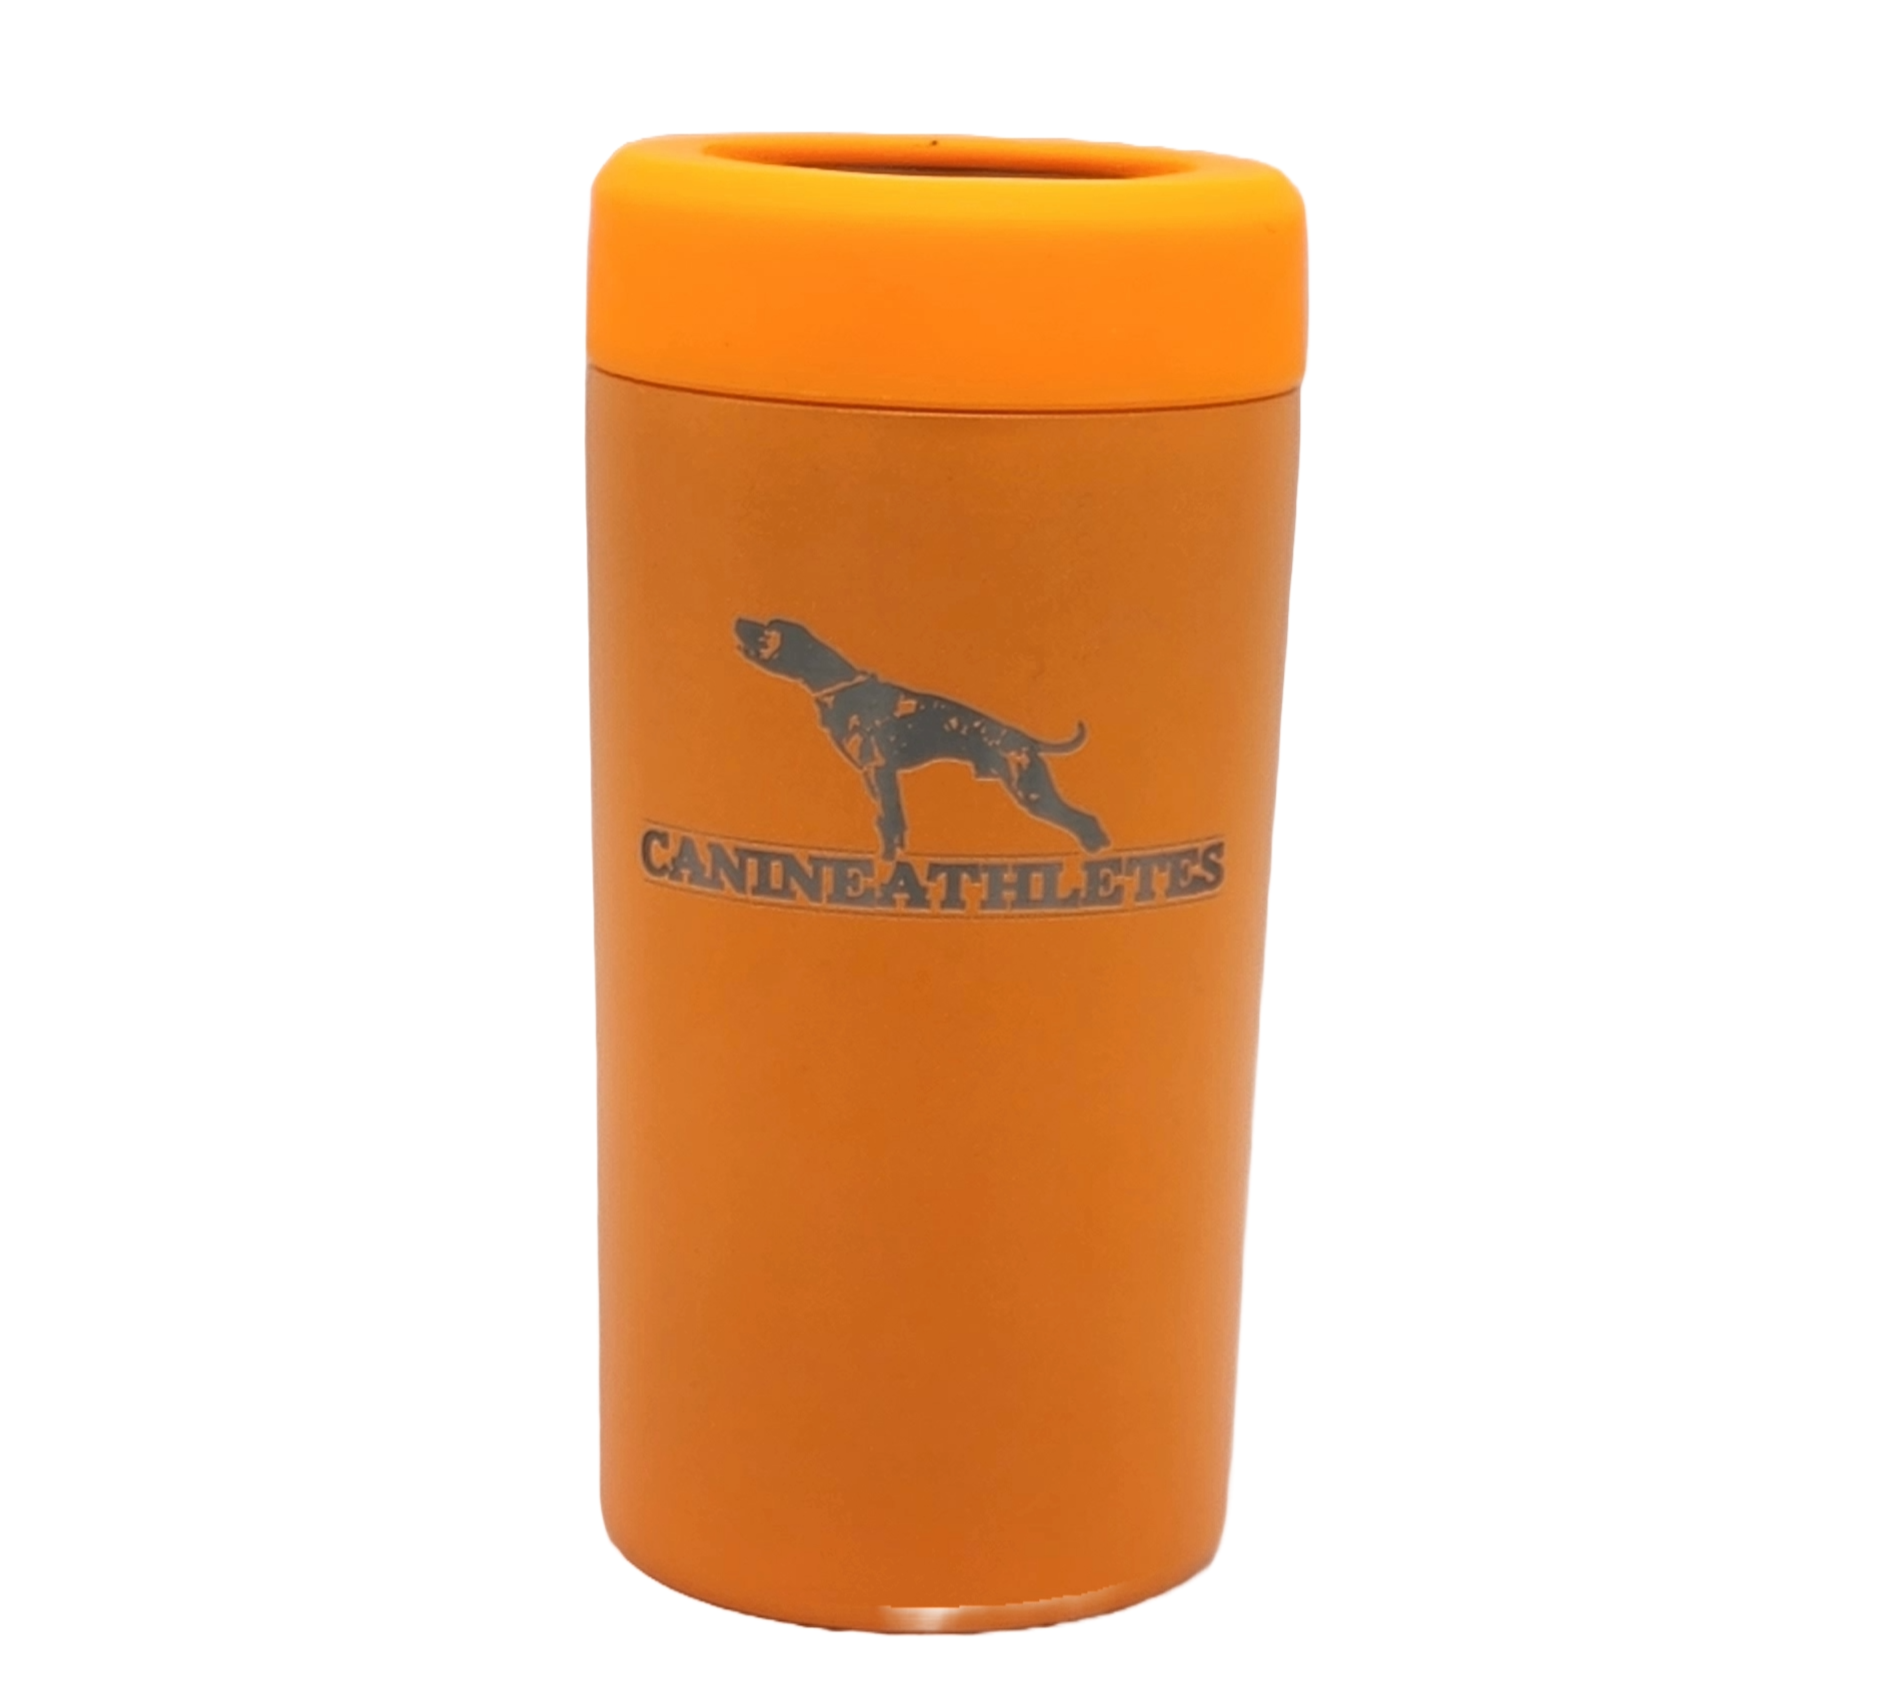 Canine Athletes X Frost Buddy Universal Buddy 2.0 Can Cooler